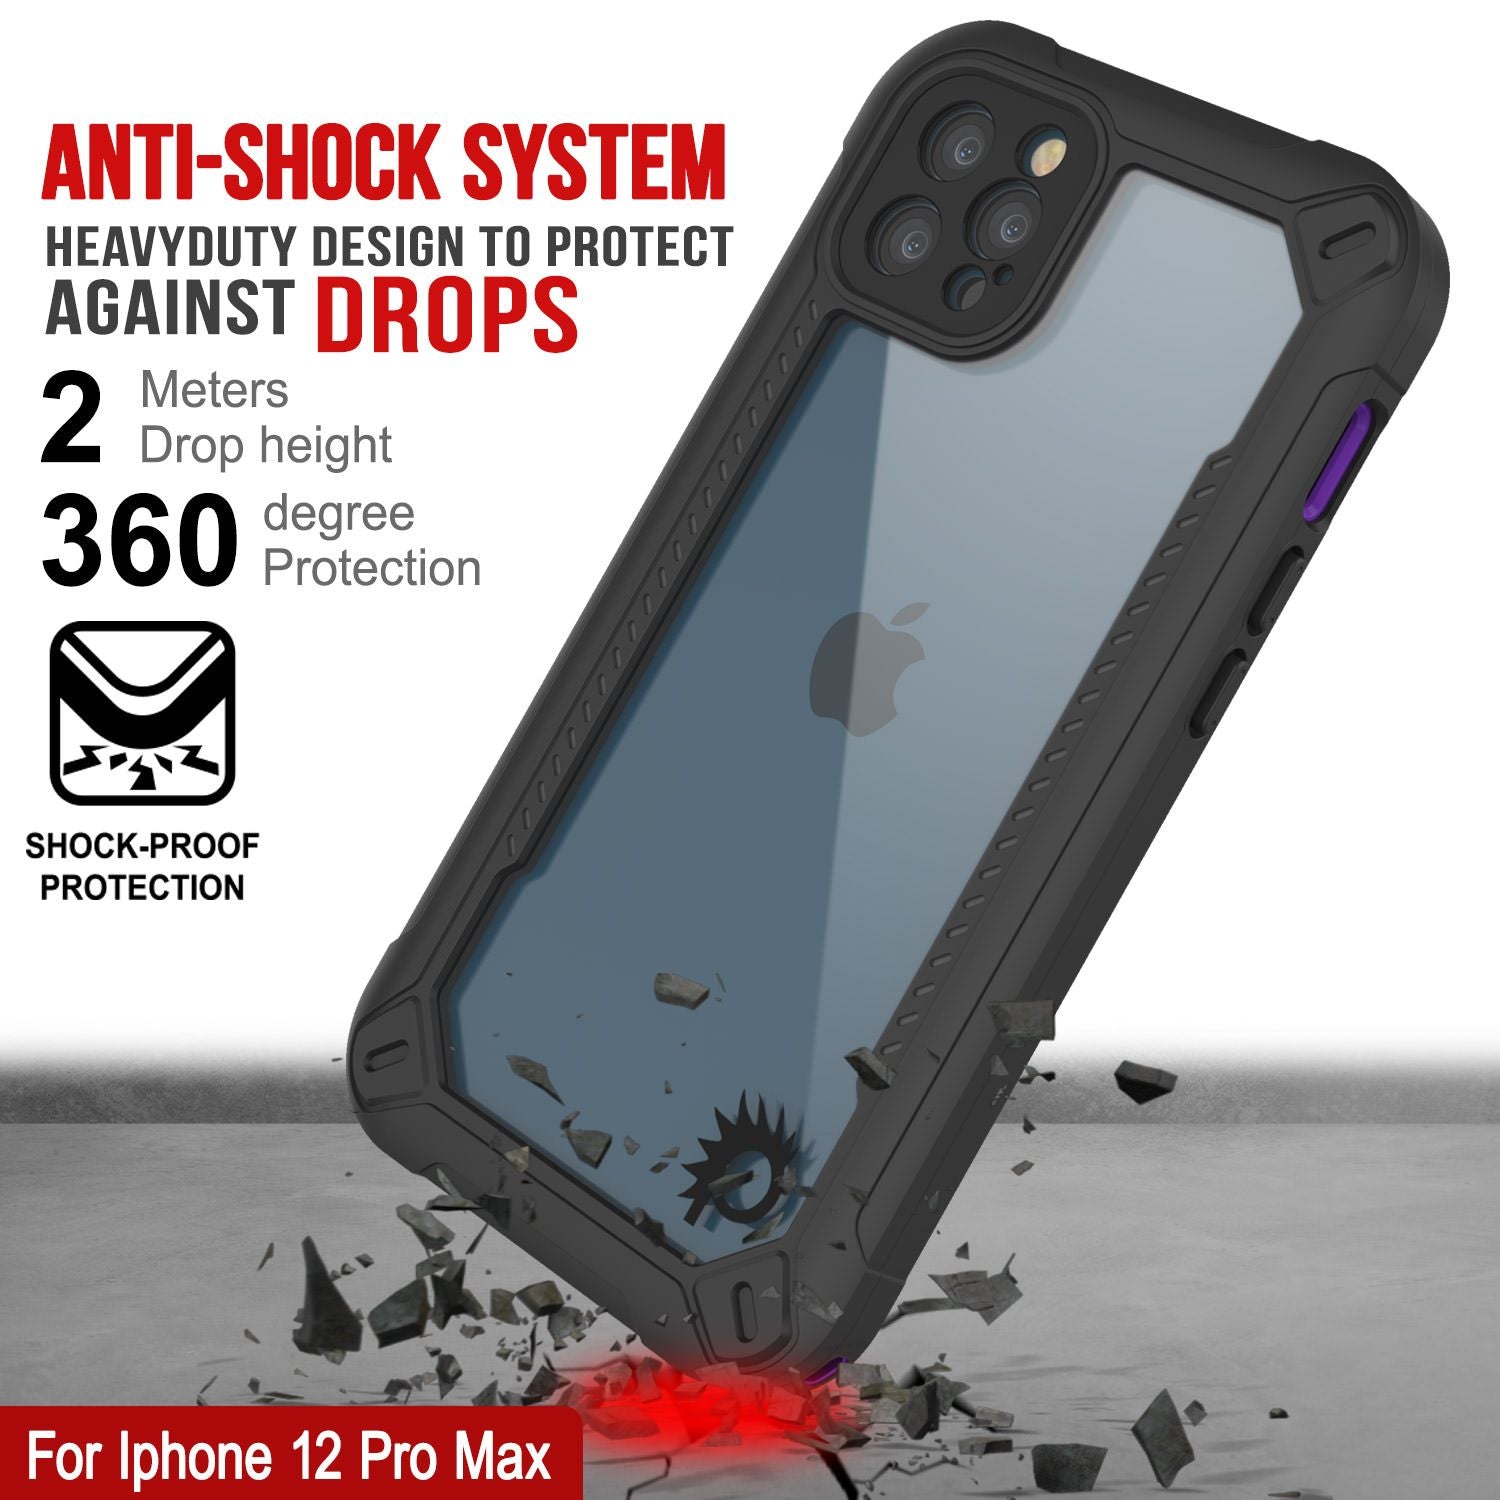 iPhone 12 Pro Max Waterproof IP68 Case, Punkcase [Purple]  [Maximus Series] [Slim Fit] [IP68 Certified] [Shockresistant] Clear Armor Cover with Screen Protector | Ultimate Protection